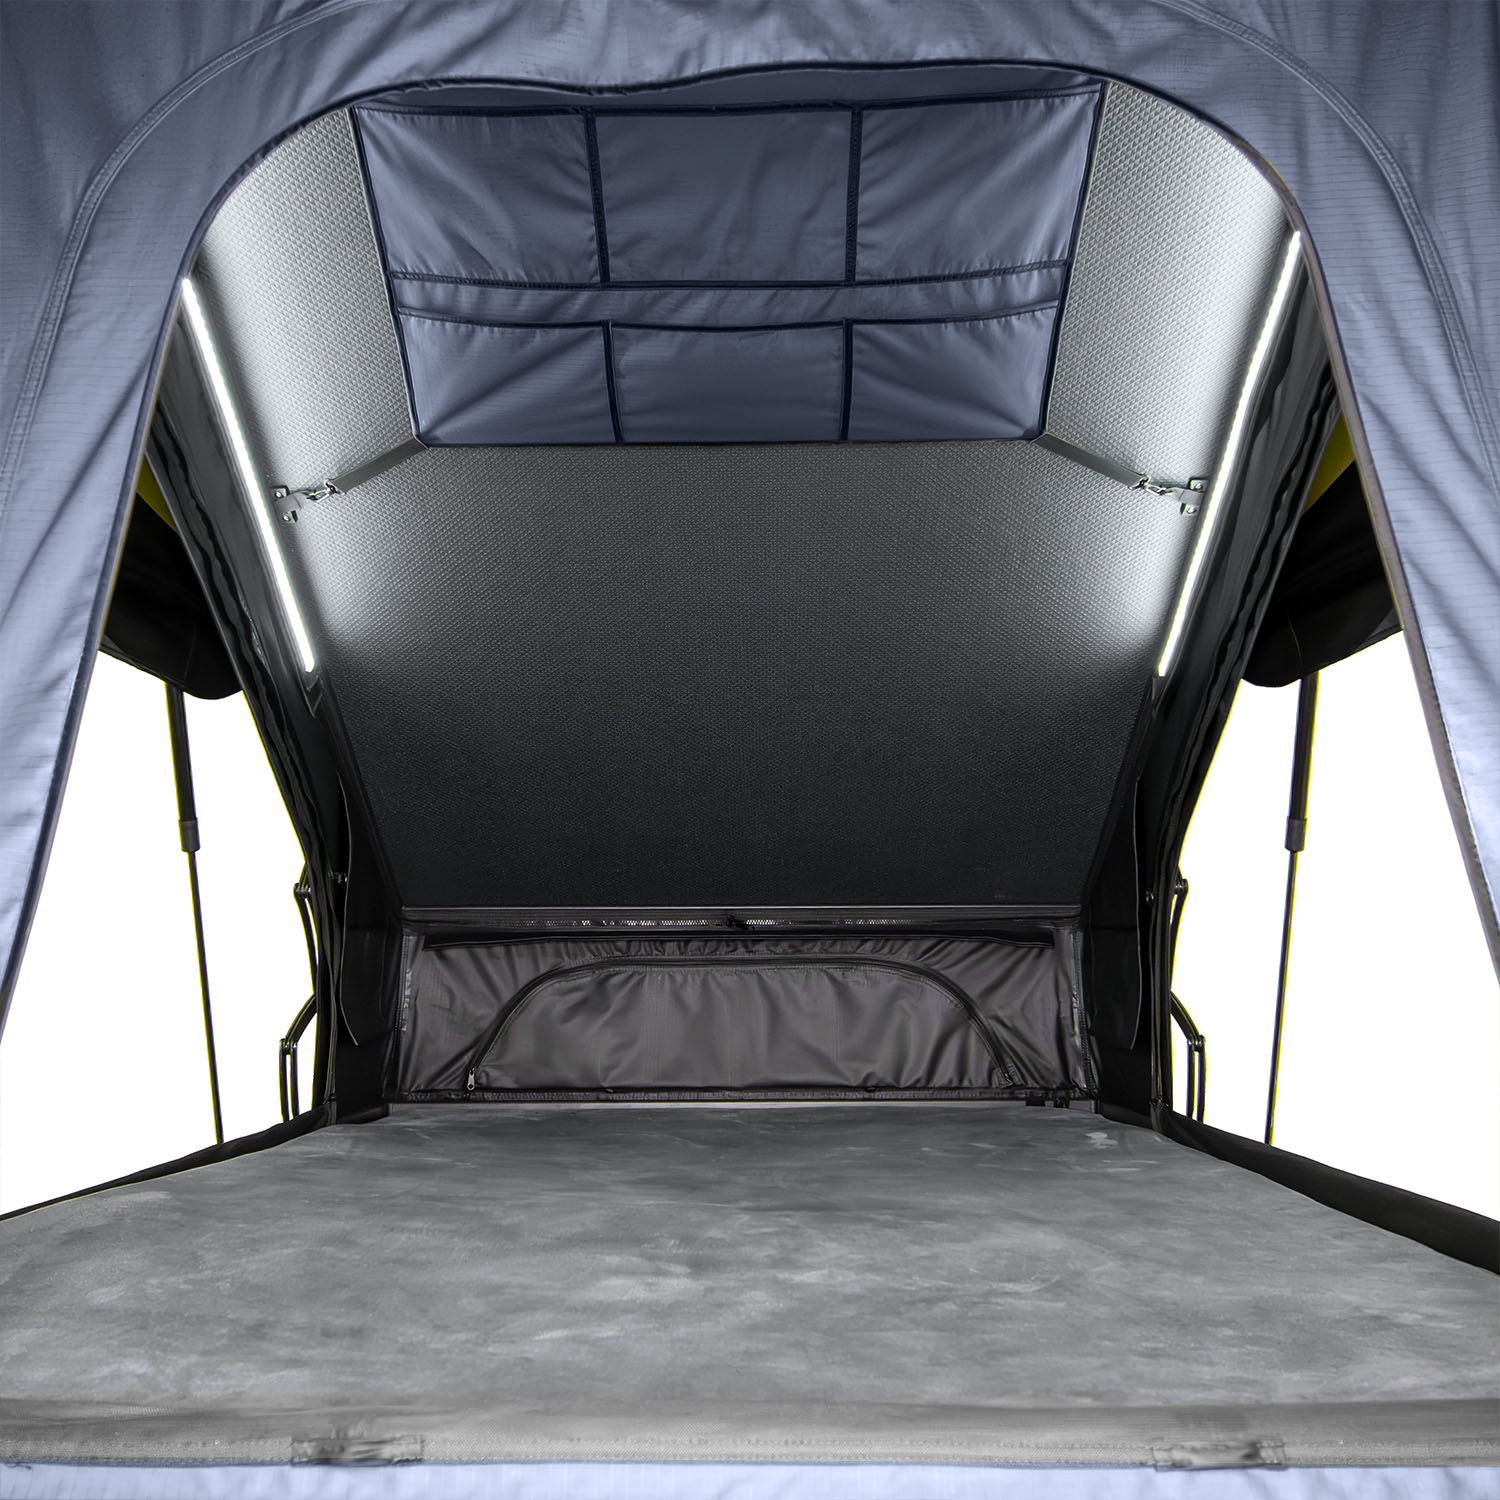 OPENROAD Aluminum Hard Shell Roof Top Tent-PeakRoof LT Series  openroad4wd.com   